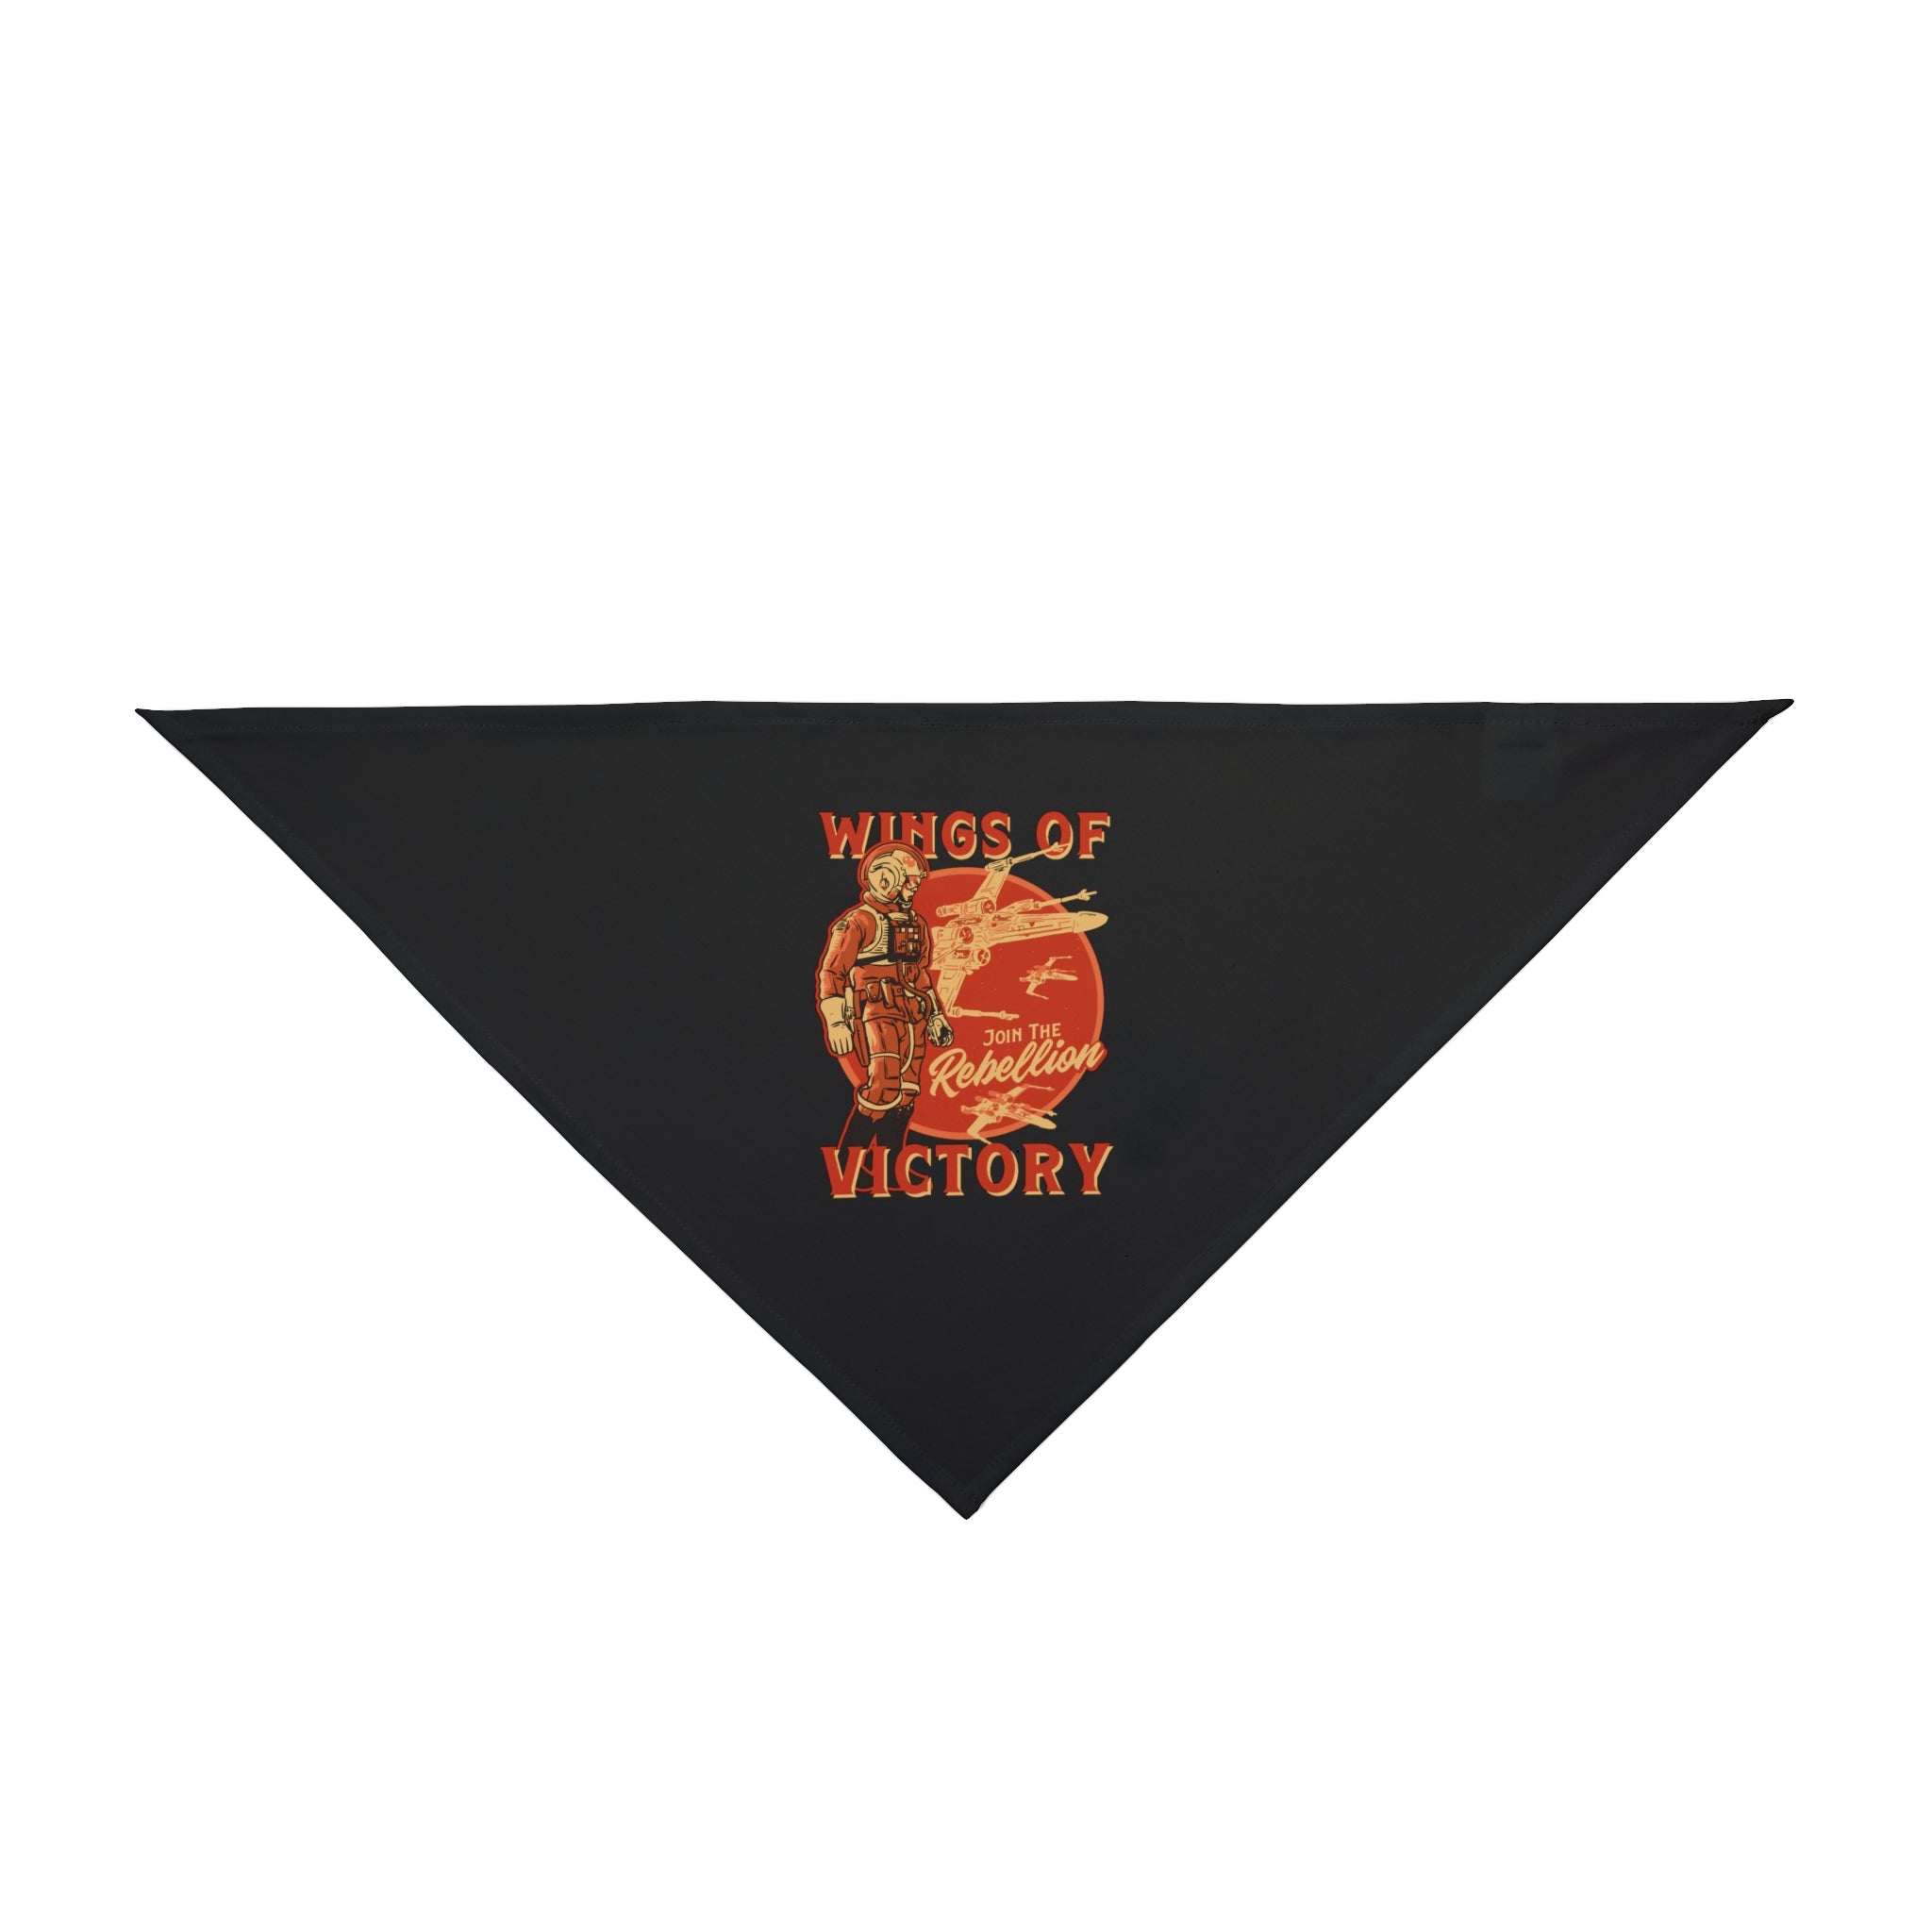 A black triangular bandana made from soft-spun polyester features a graphic of an astronaut with "Wings of Rebellion" and "Victory" text in red and orange, designed to ensure pet comfort. This Wings of Victory - Pet Bandana is perfect for your adventurous companion.
